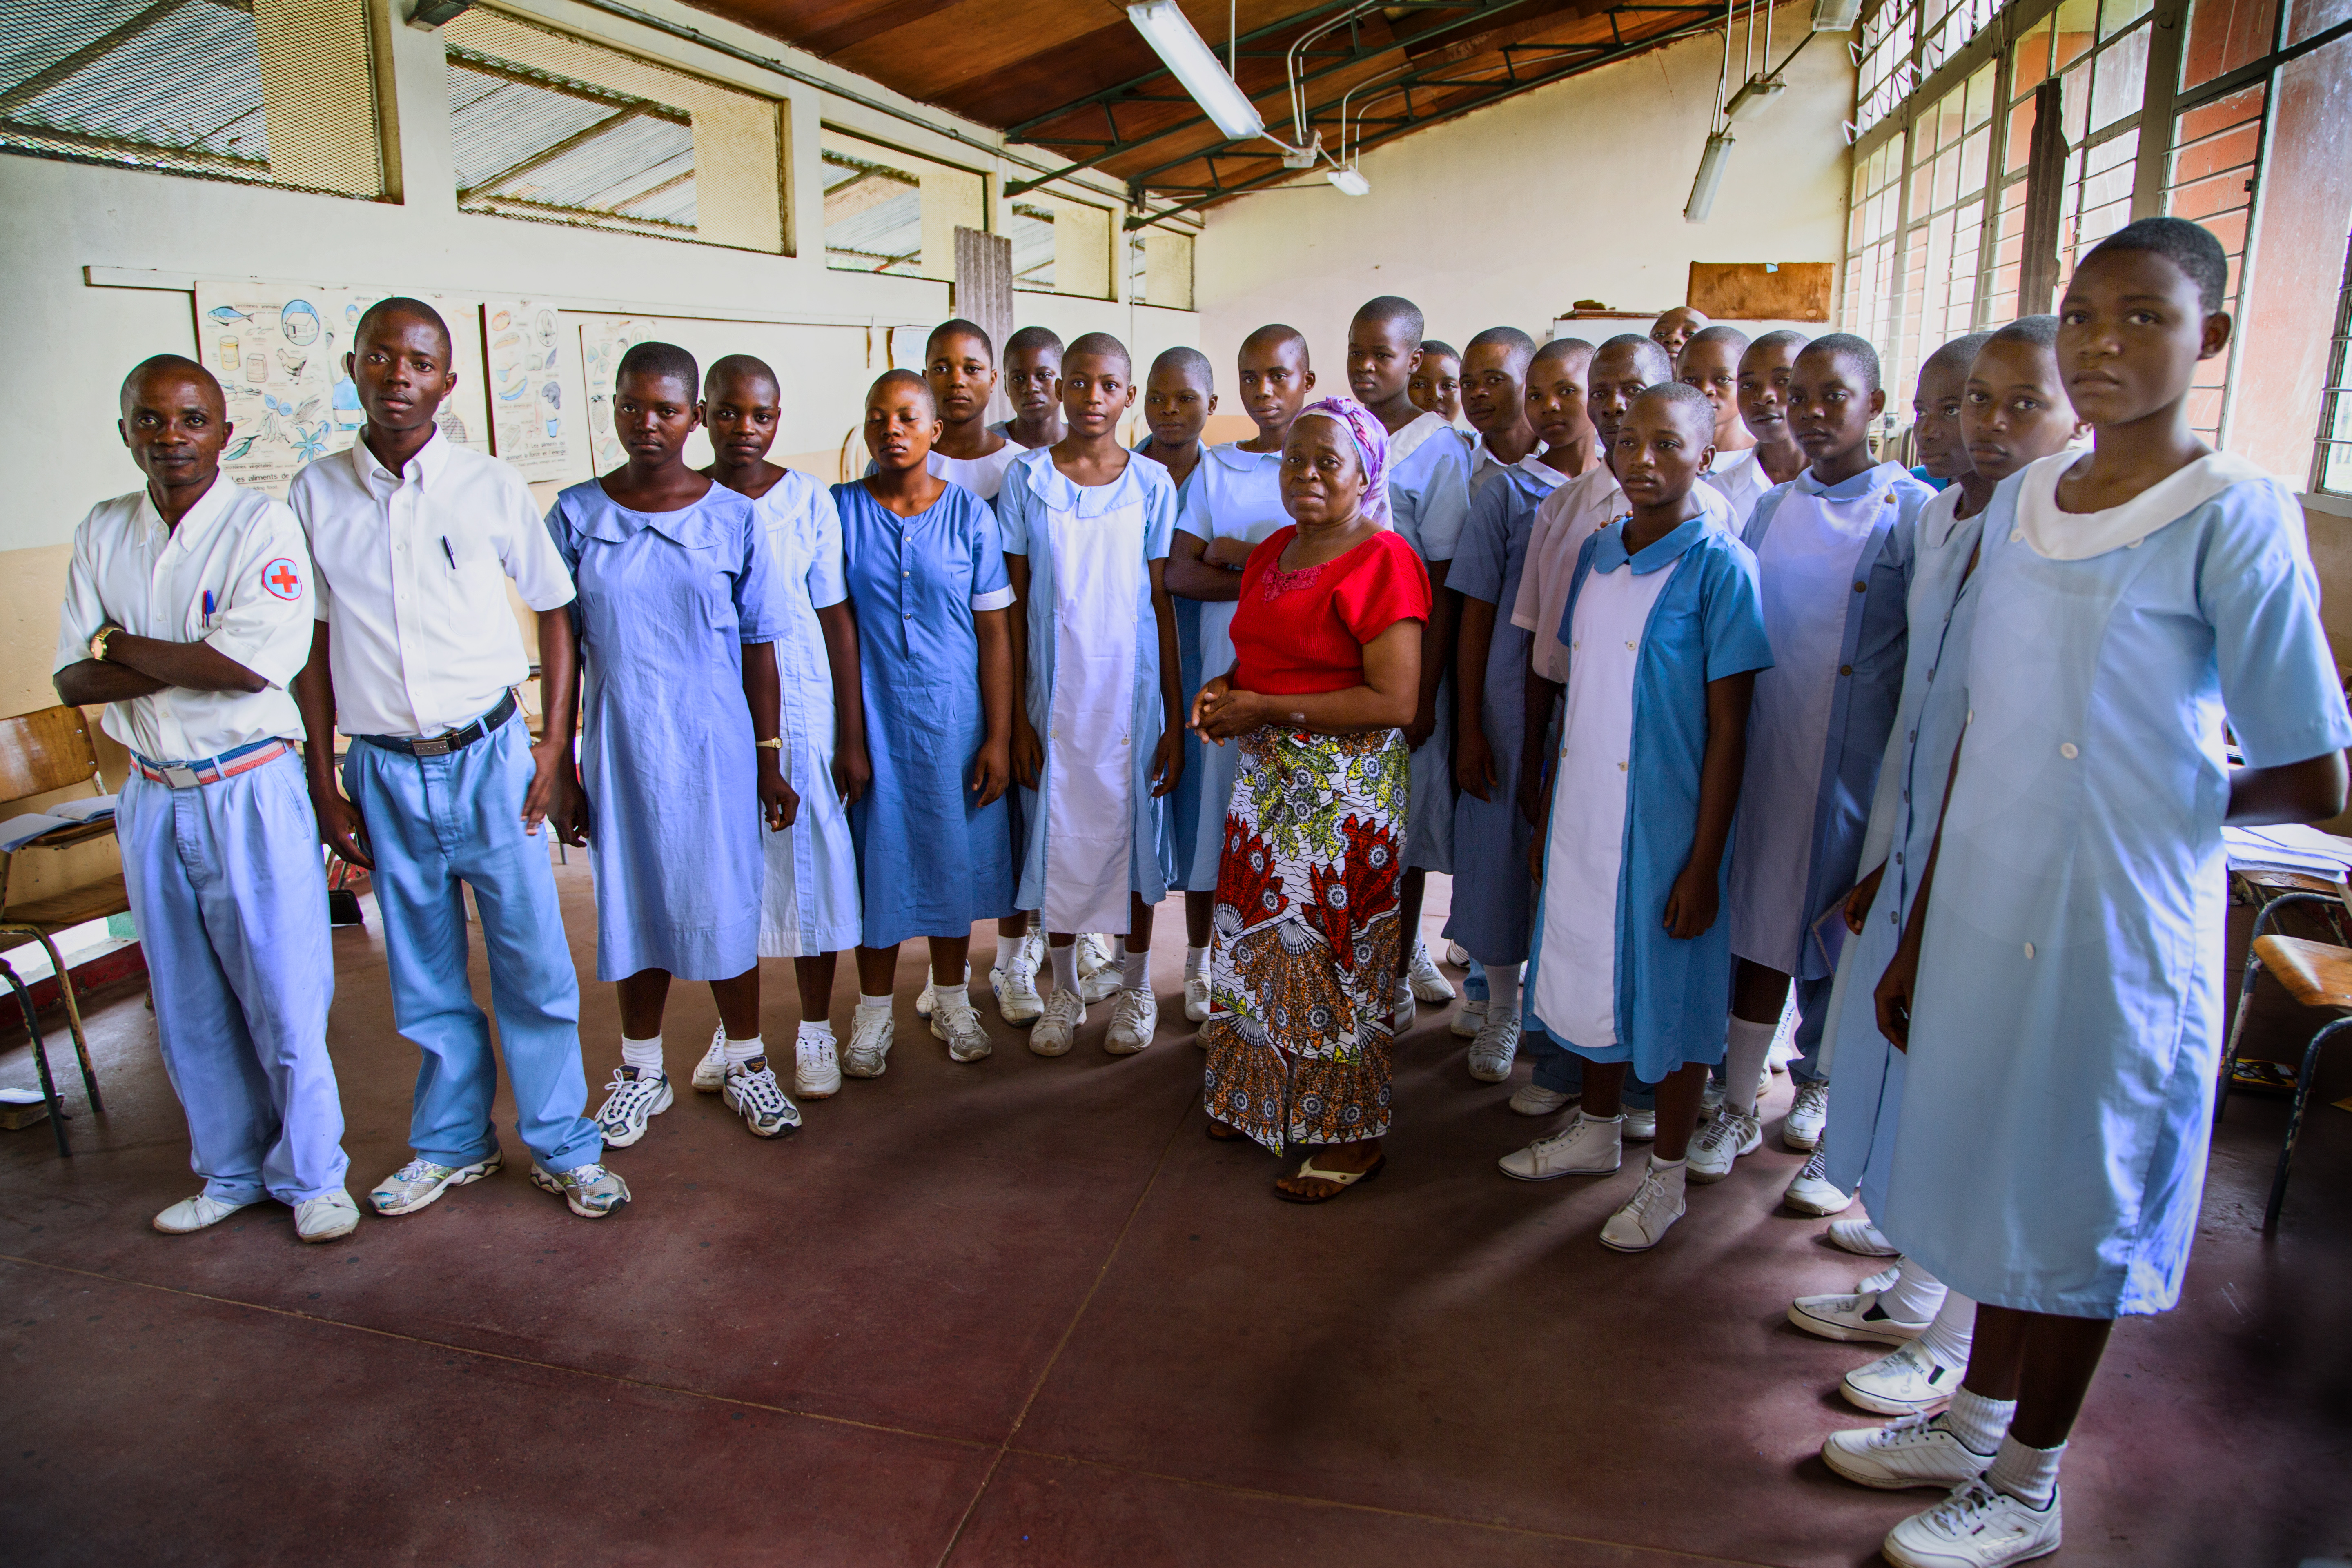 DRC – IMCK Nursing School and Hospital trying simply to survive amid crisis